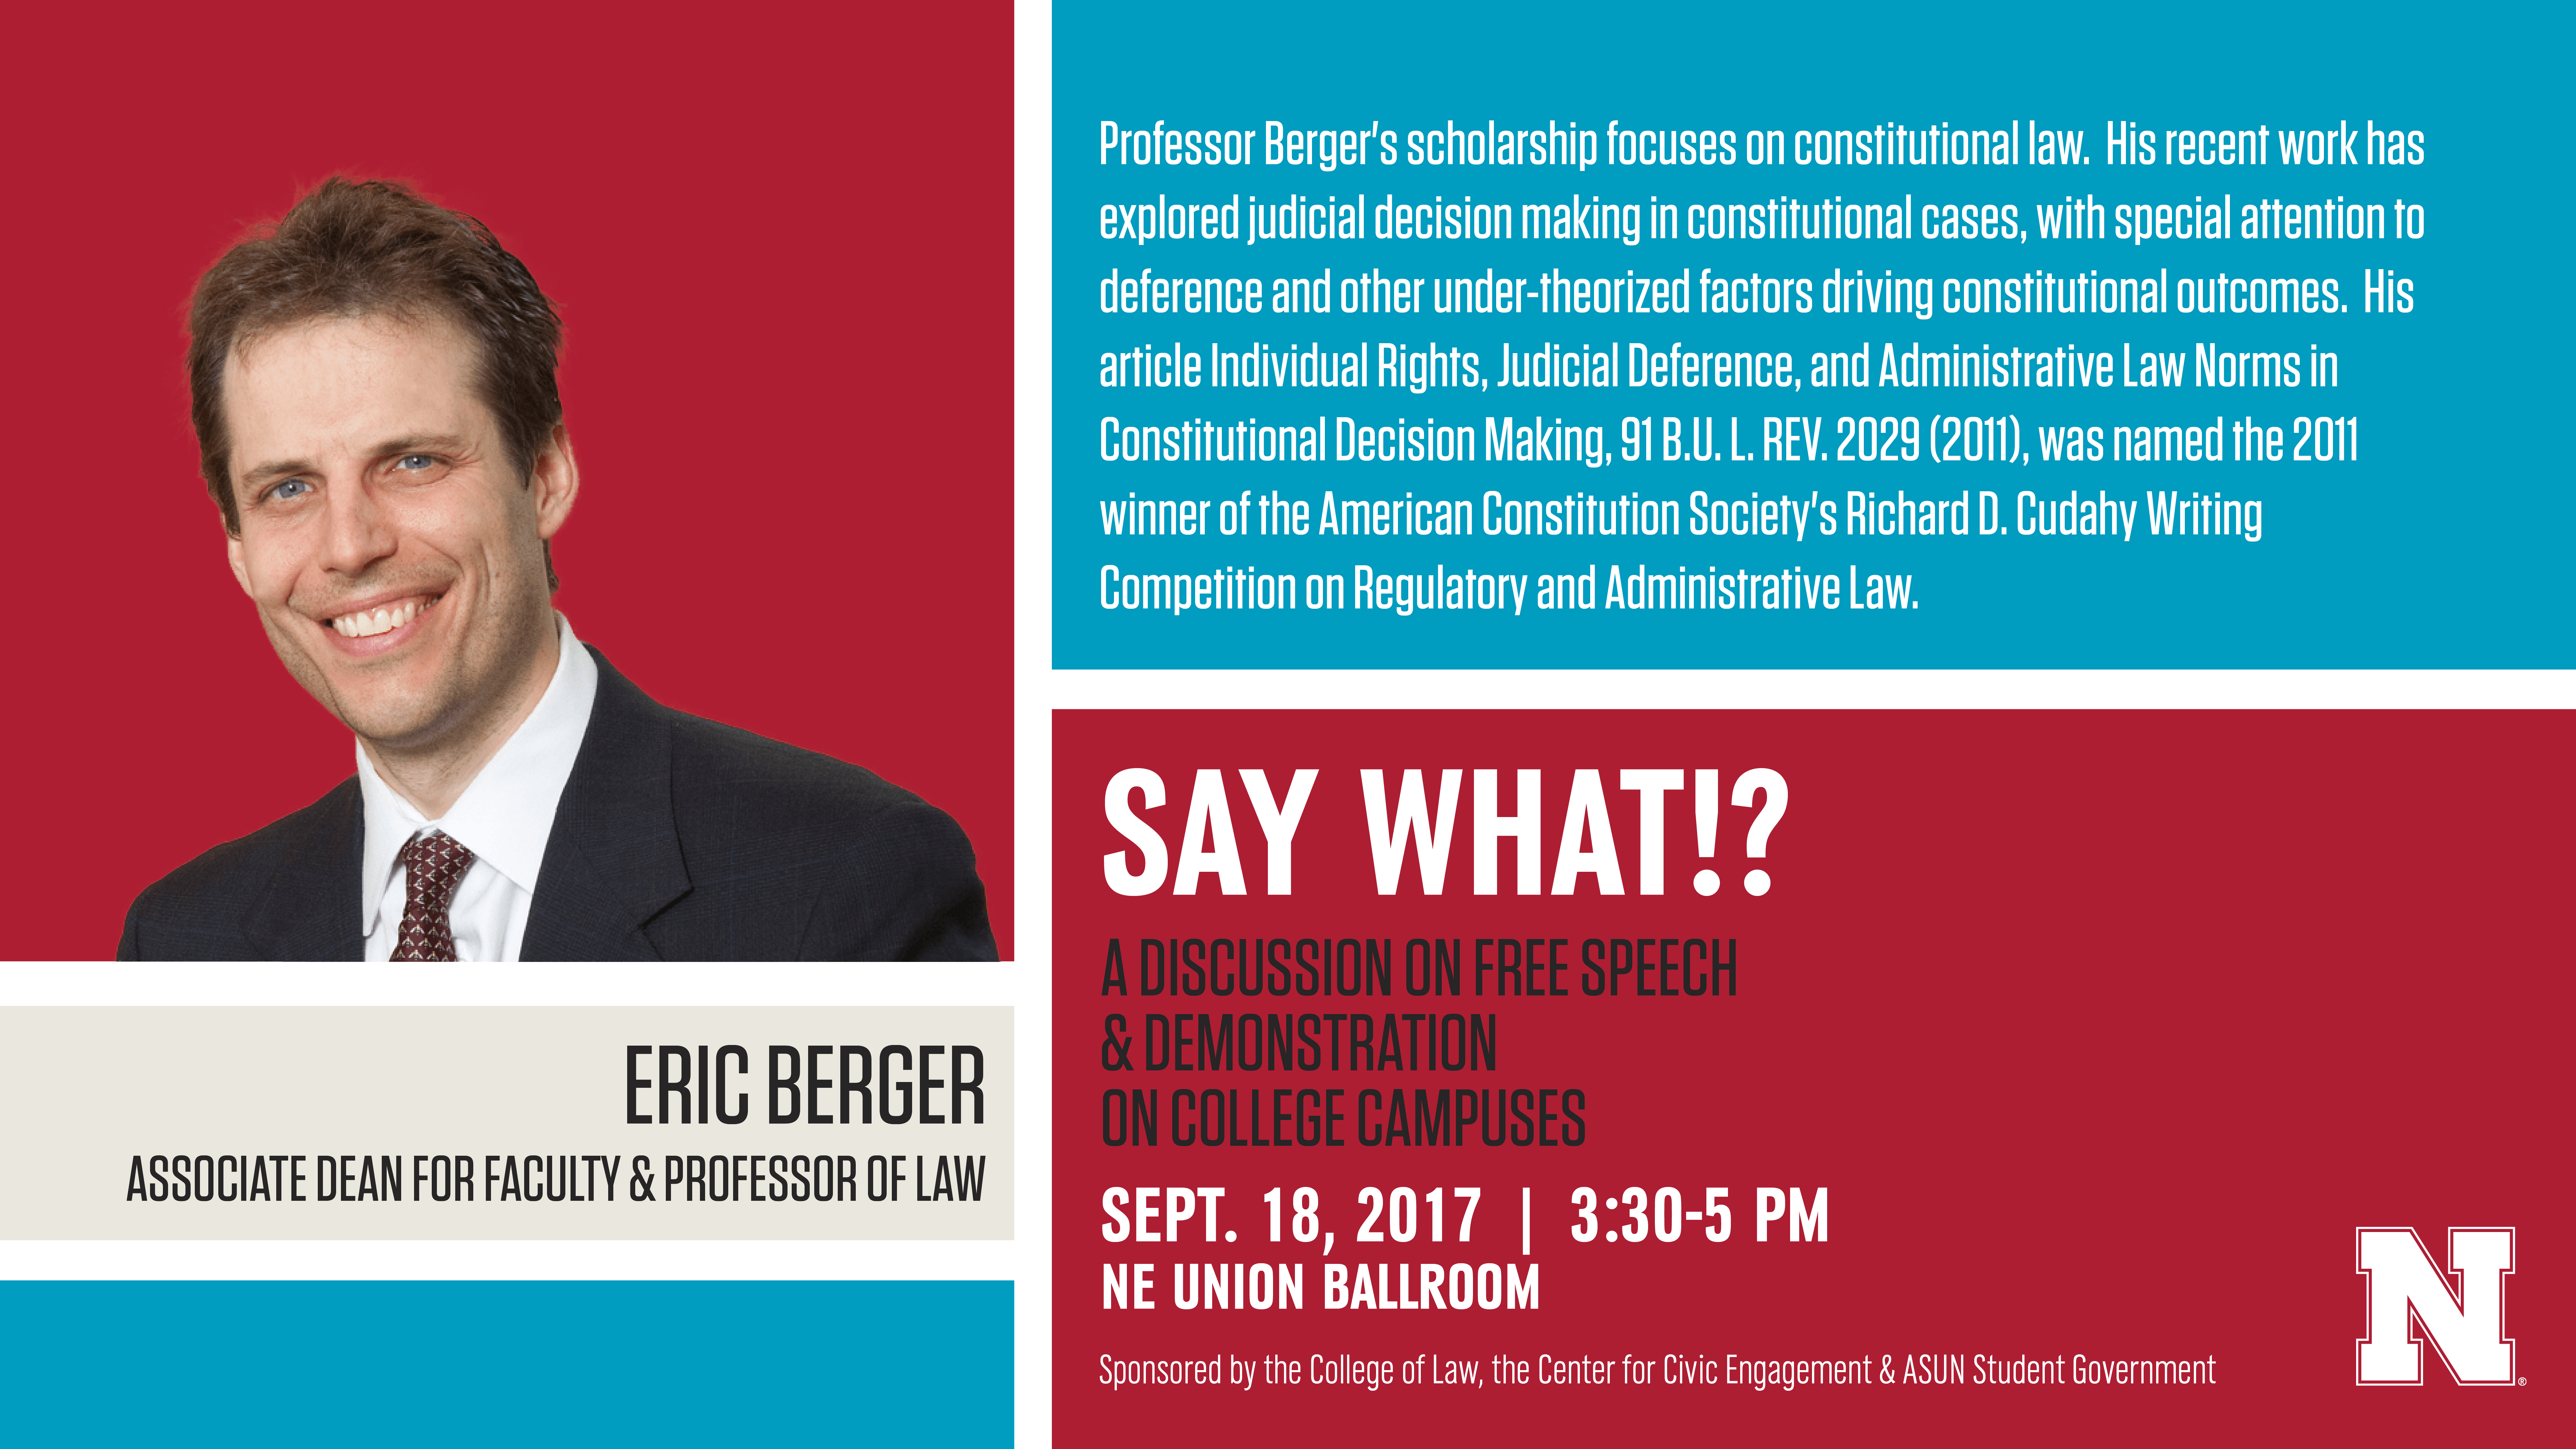 The event will take place on Monday, Sept. 18 at 3:30-5:30 p.m. in the Nebraska Union Ballroom. 